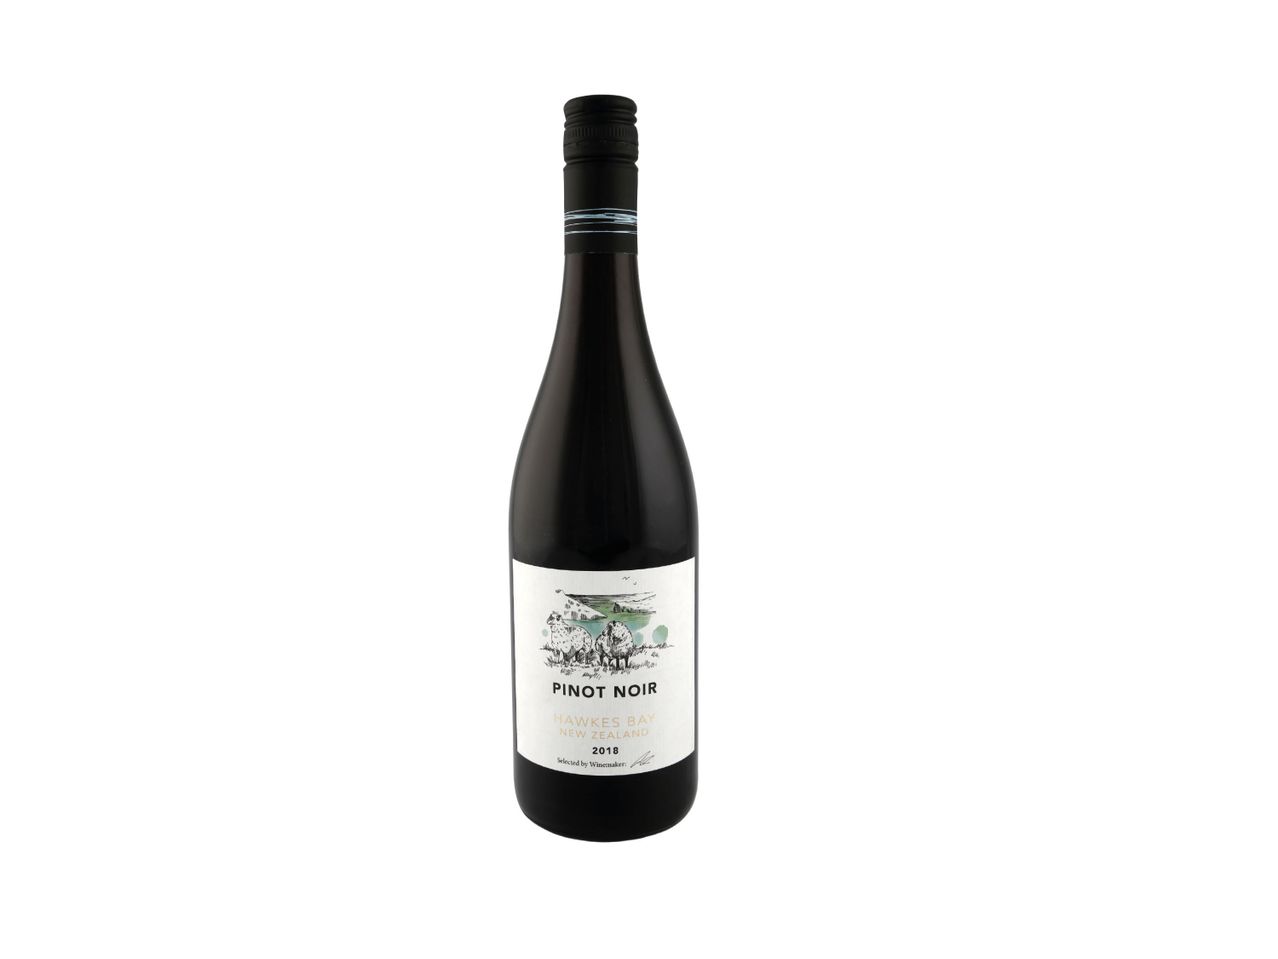 Go to full screen view: New Zealand Pinot Noir Hawkes Bay - Image 1